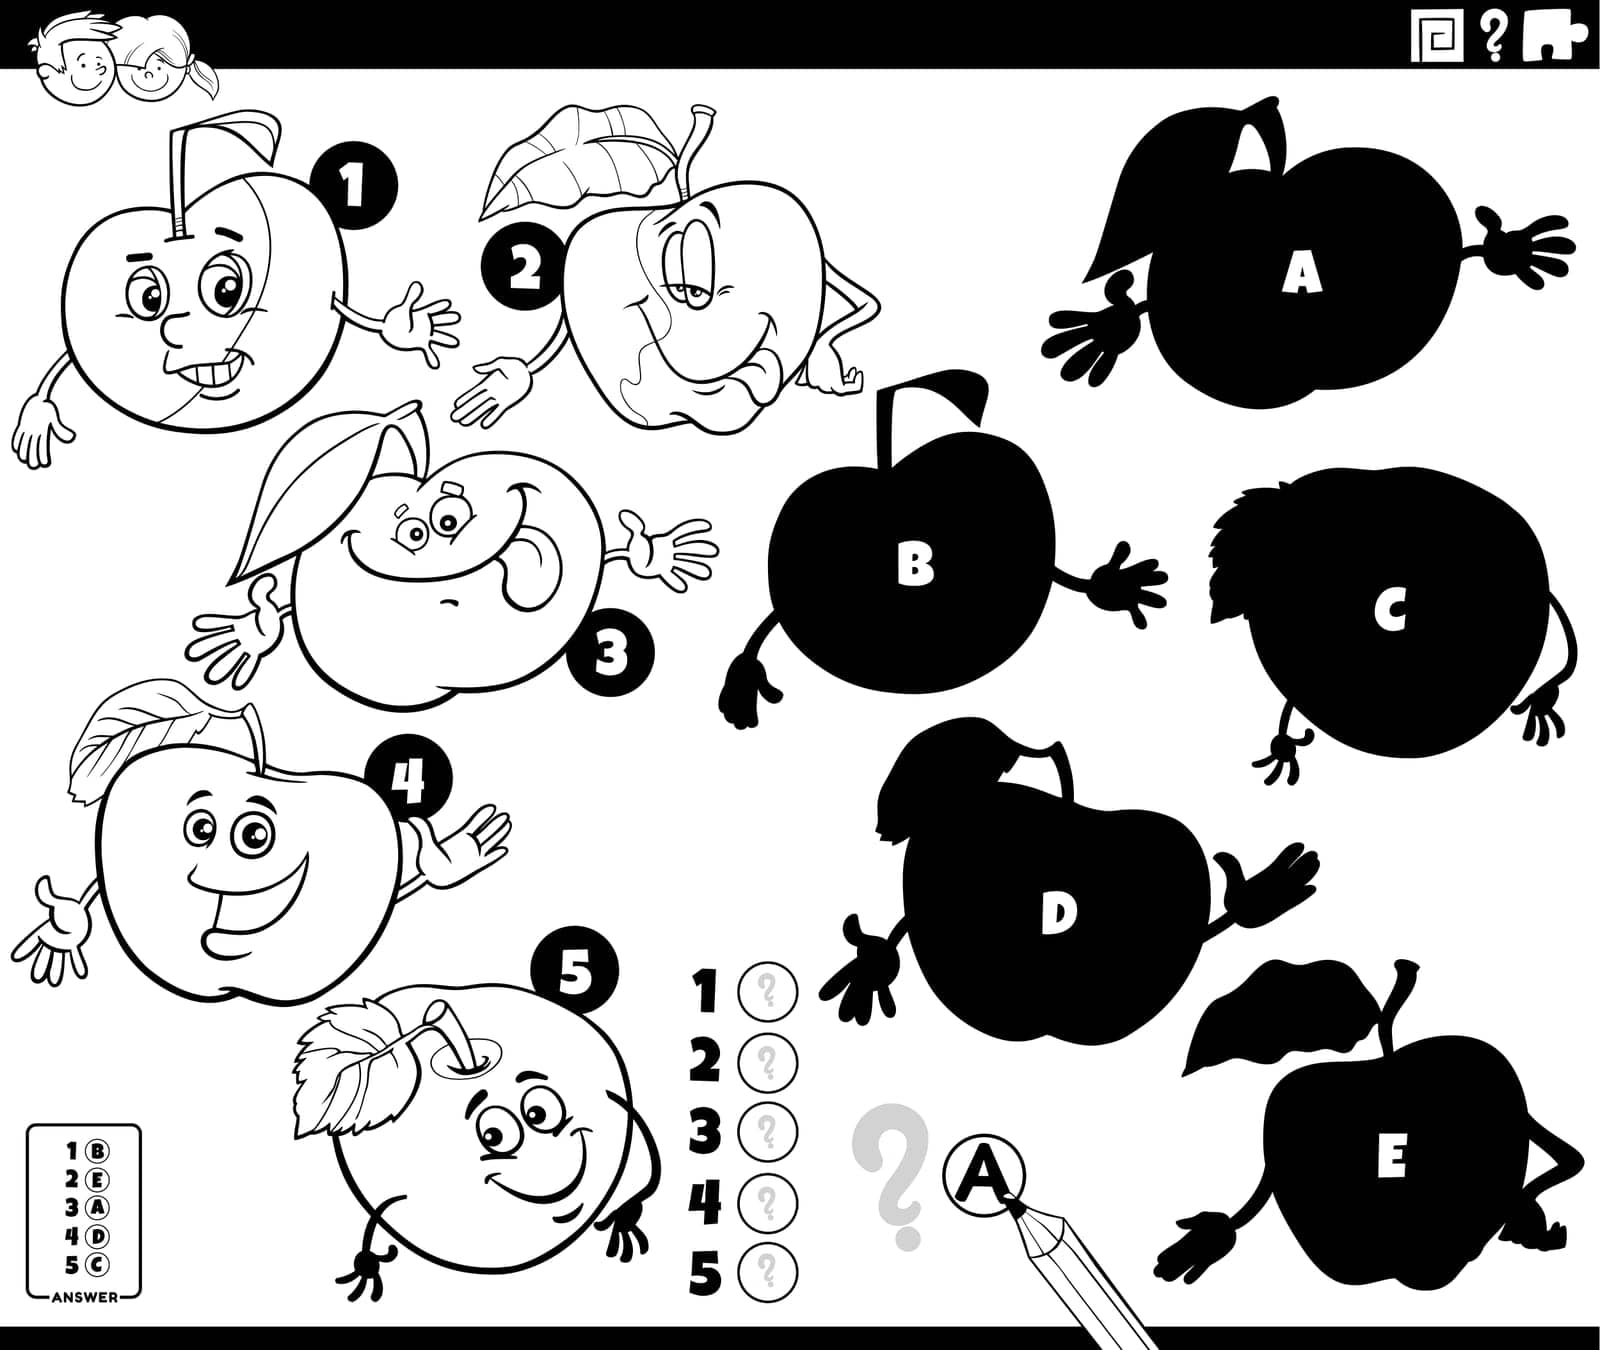 Black and white cartoon illustration of finding the right shadows to the pictures educational game with comic apple characters coloring page